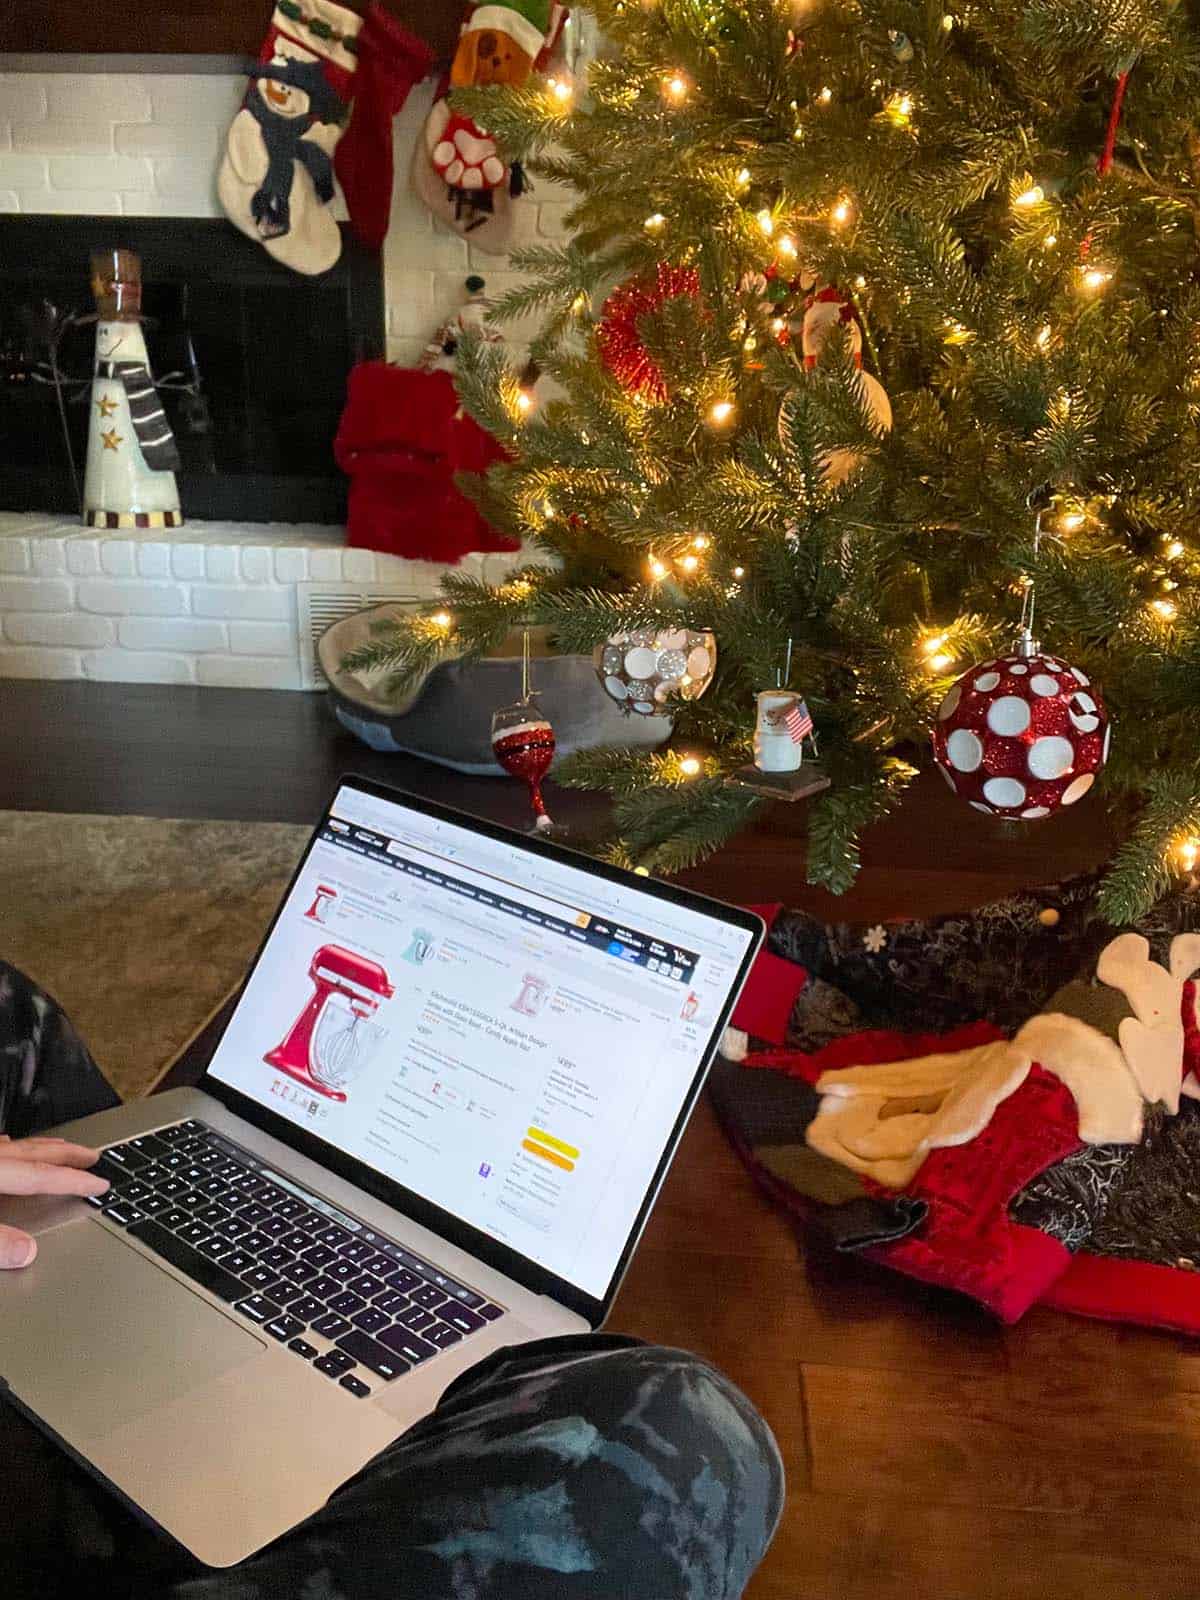 Me sitting on the floor by the tree with my computer open to shop.